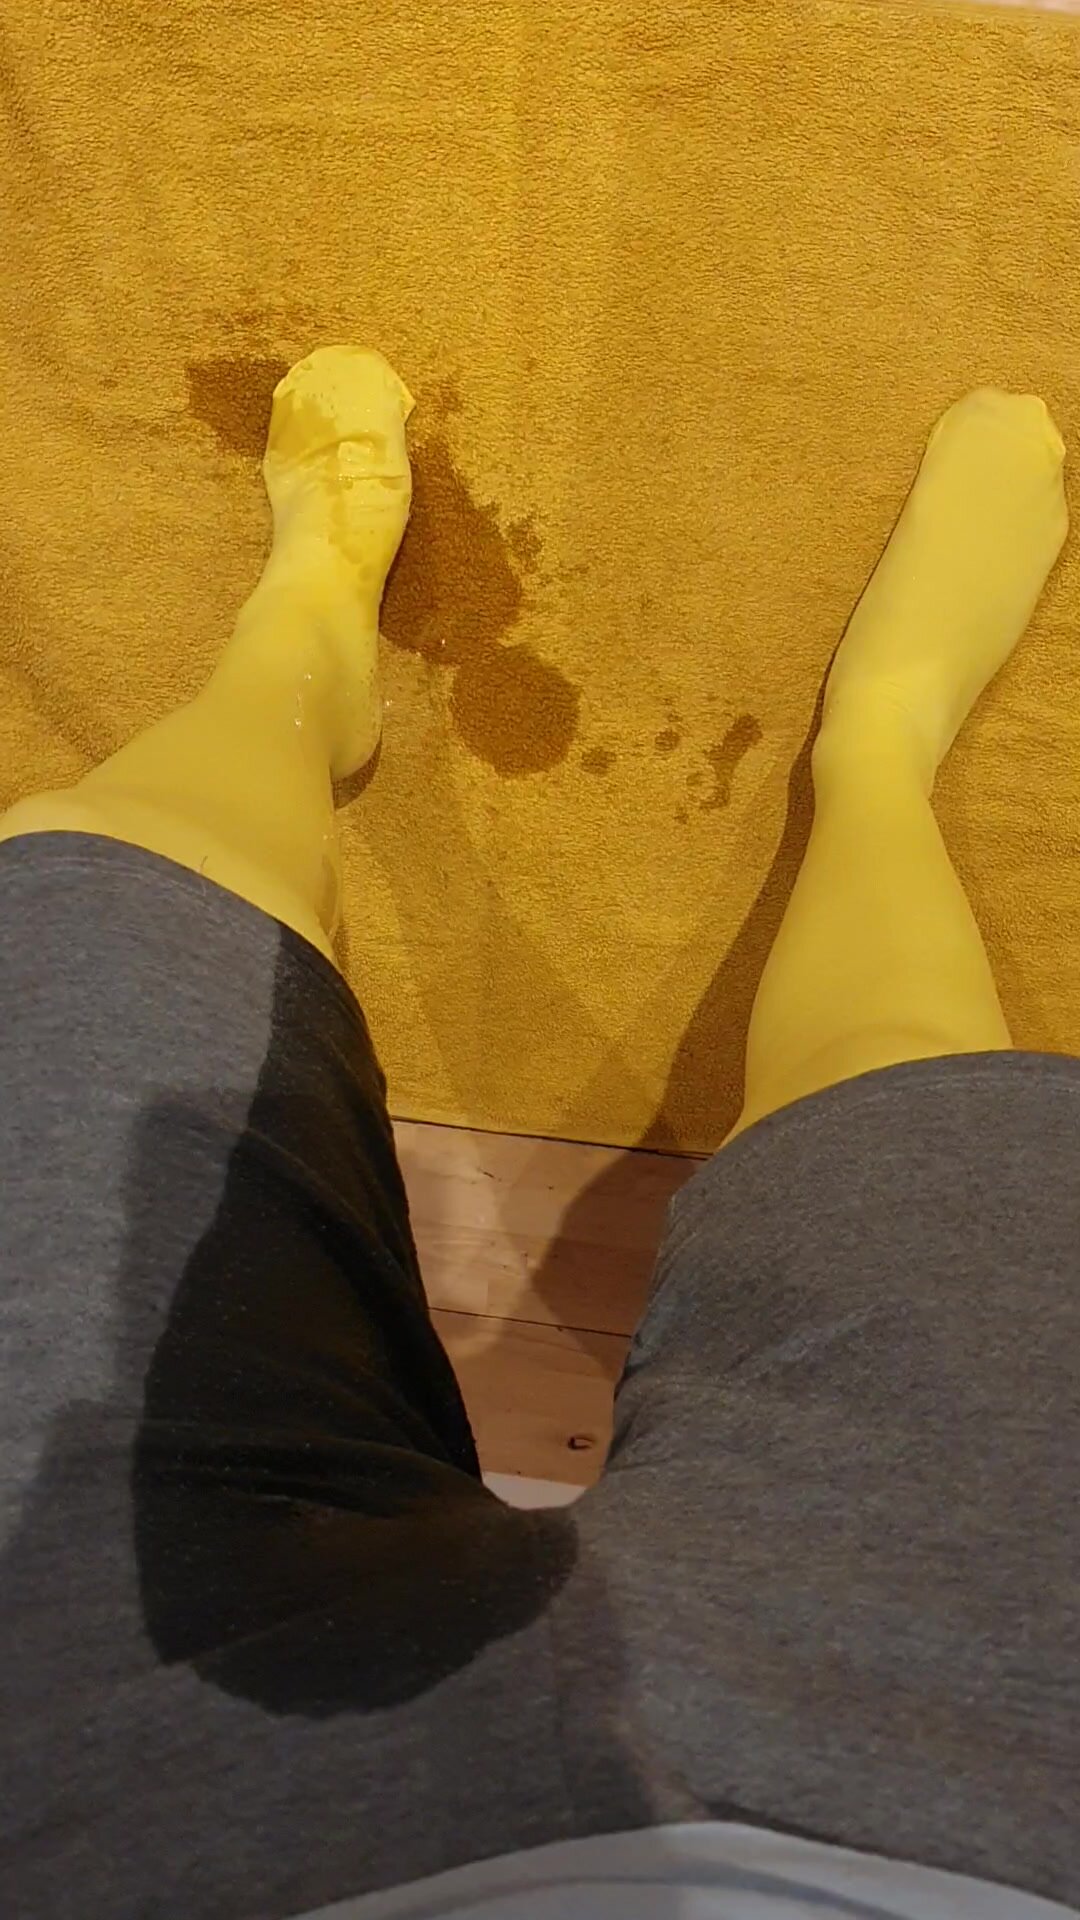 Wetting my shorts and yellow tights